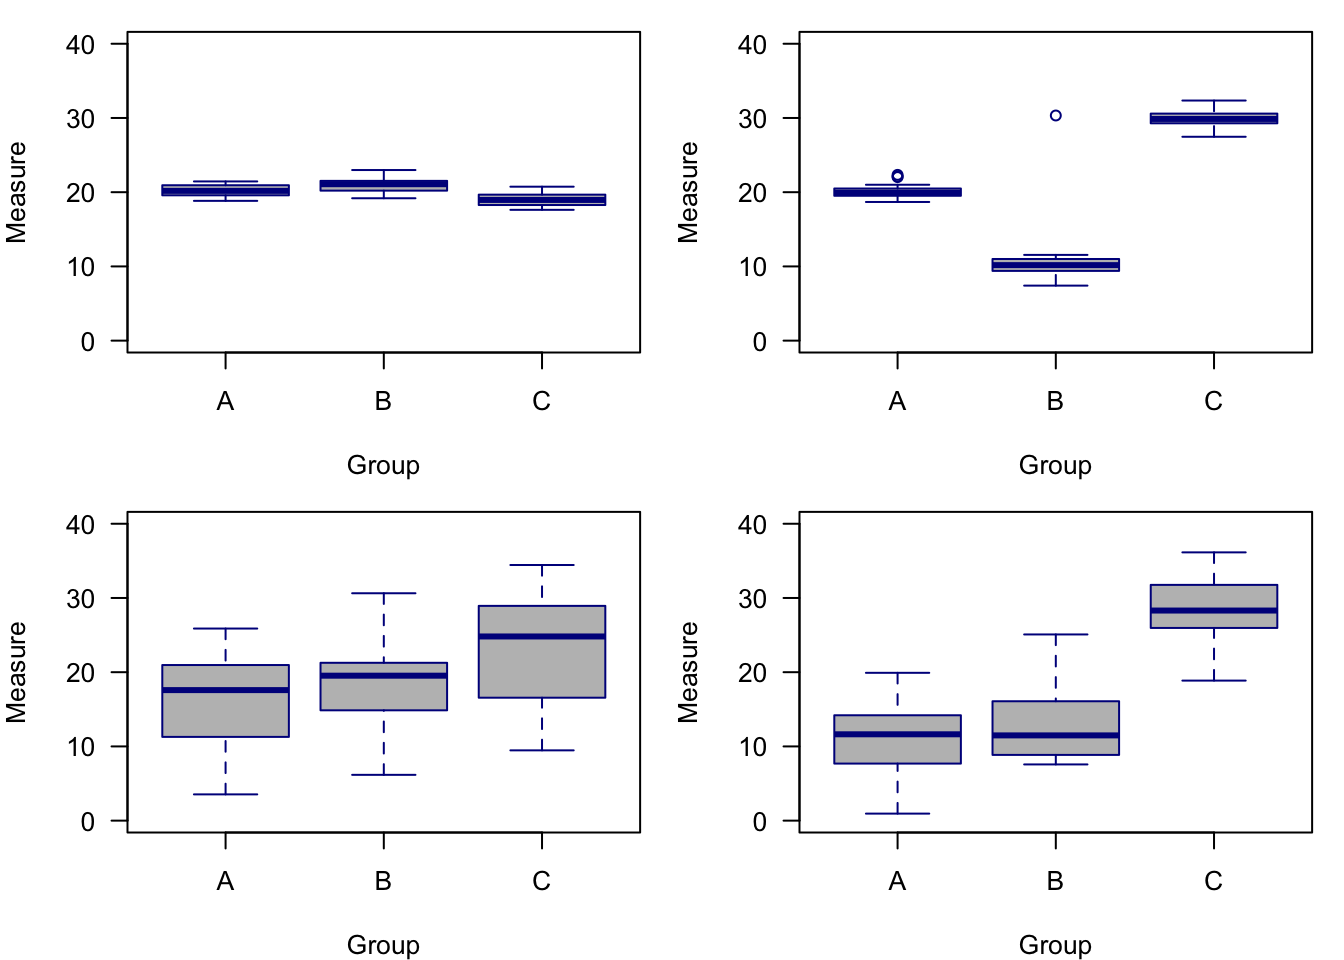 Examples of different sums of squares. The top left panel shows little within-group variance and little between-group variance. The top right panel shows little within-group variance, but high among-group variance. The lower left panel shows high within-group variance but low among-group variance. The lower right panel shows high within-group variance and high among group-variance.